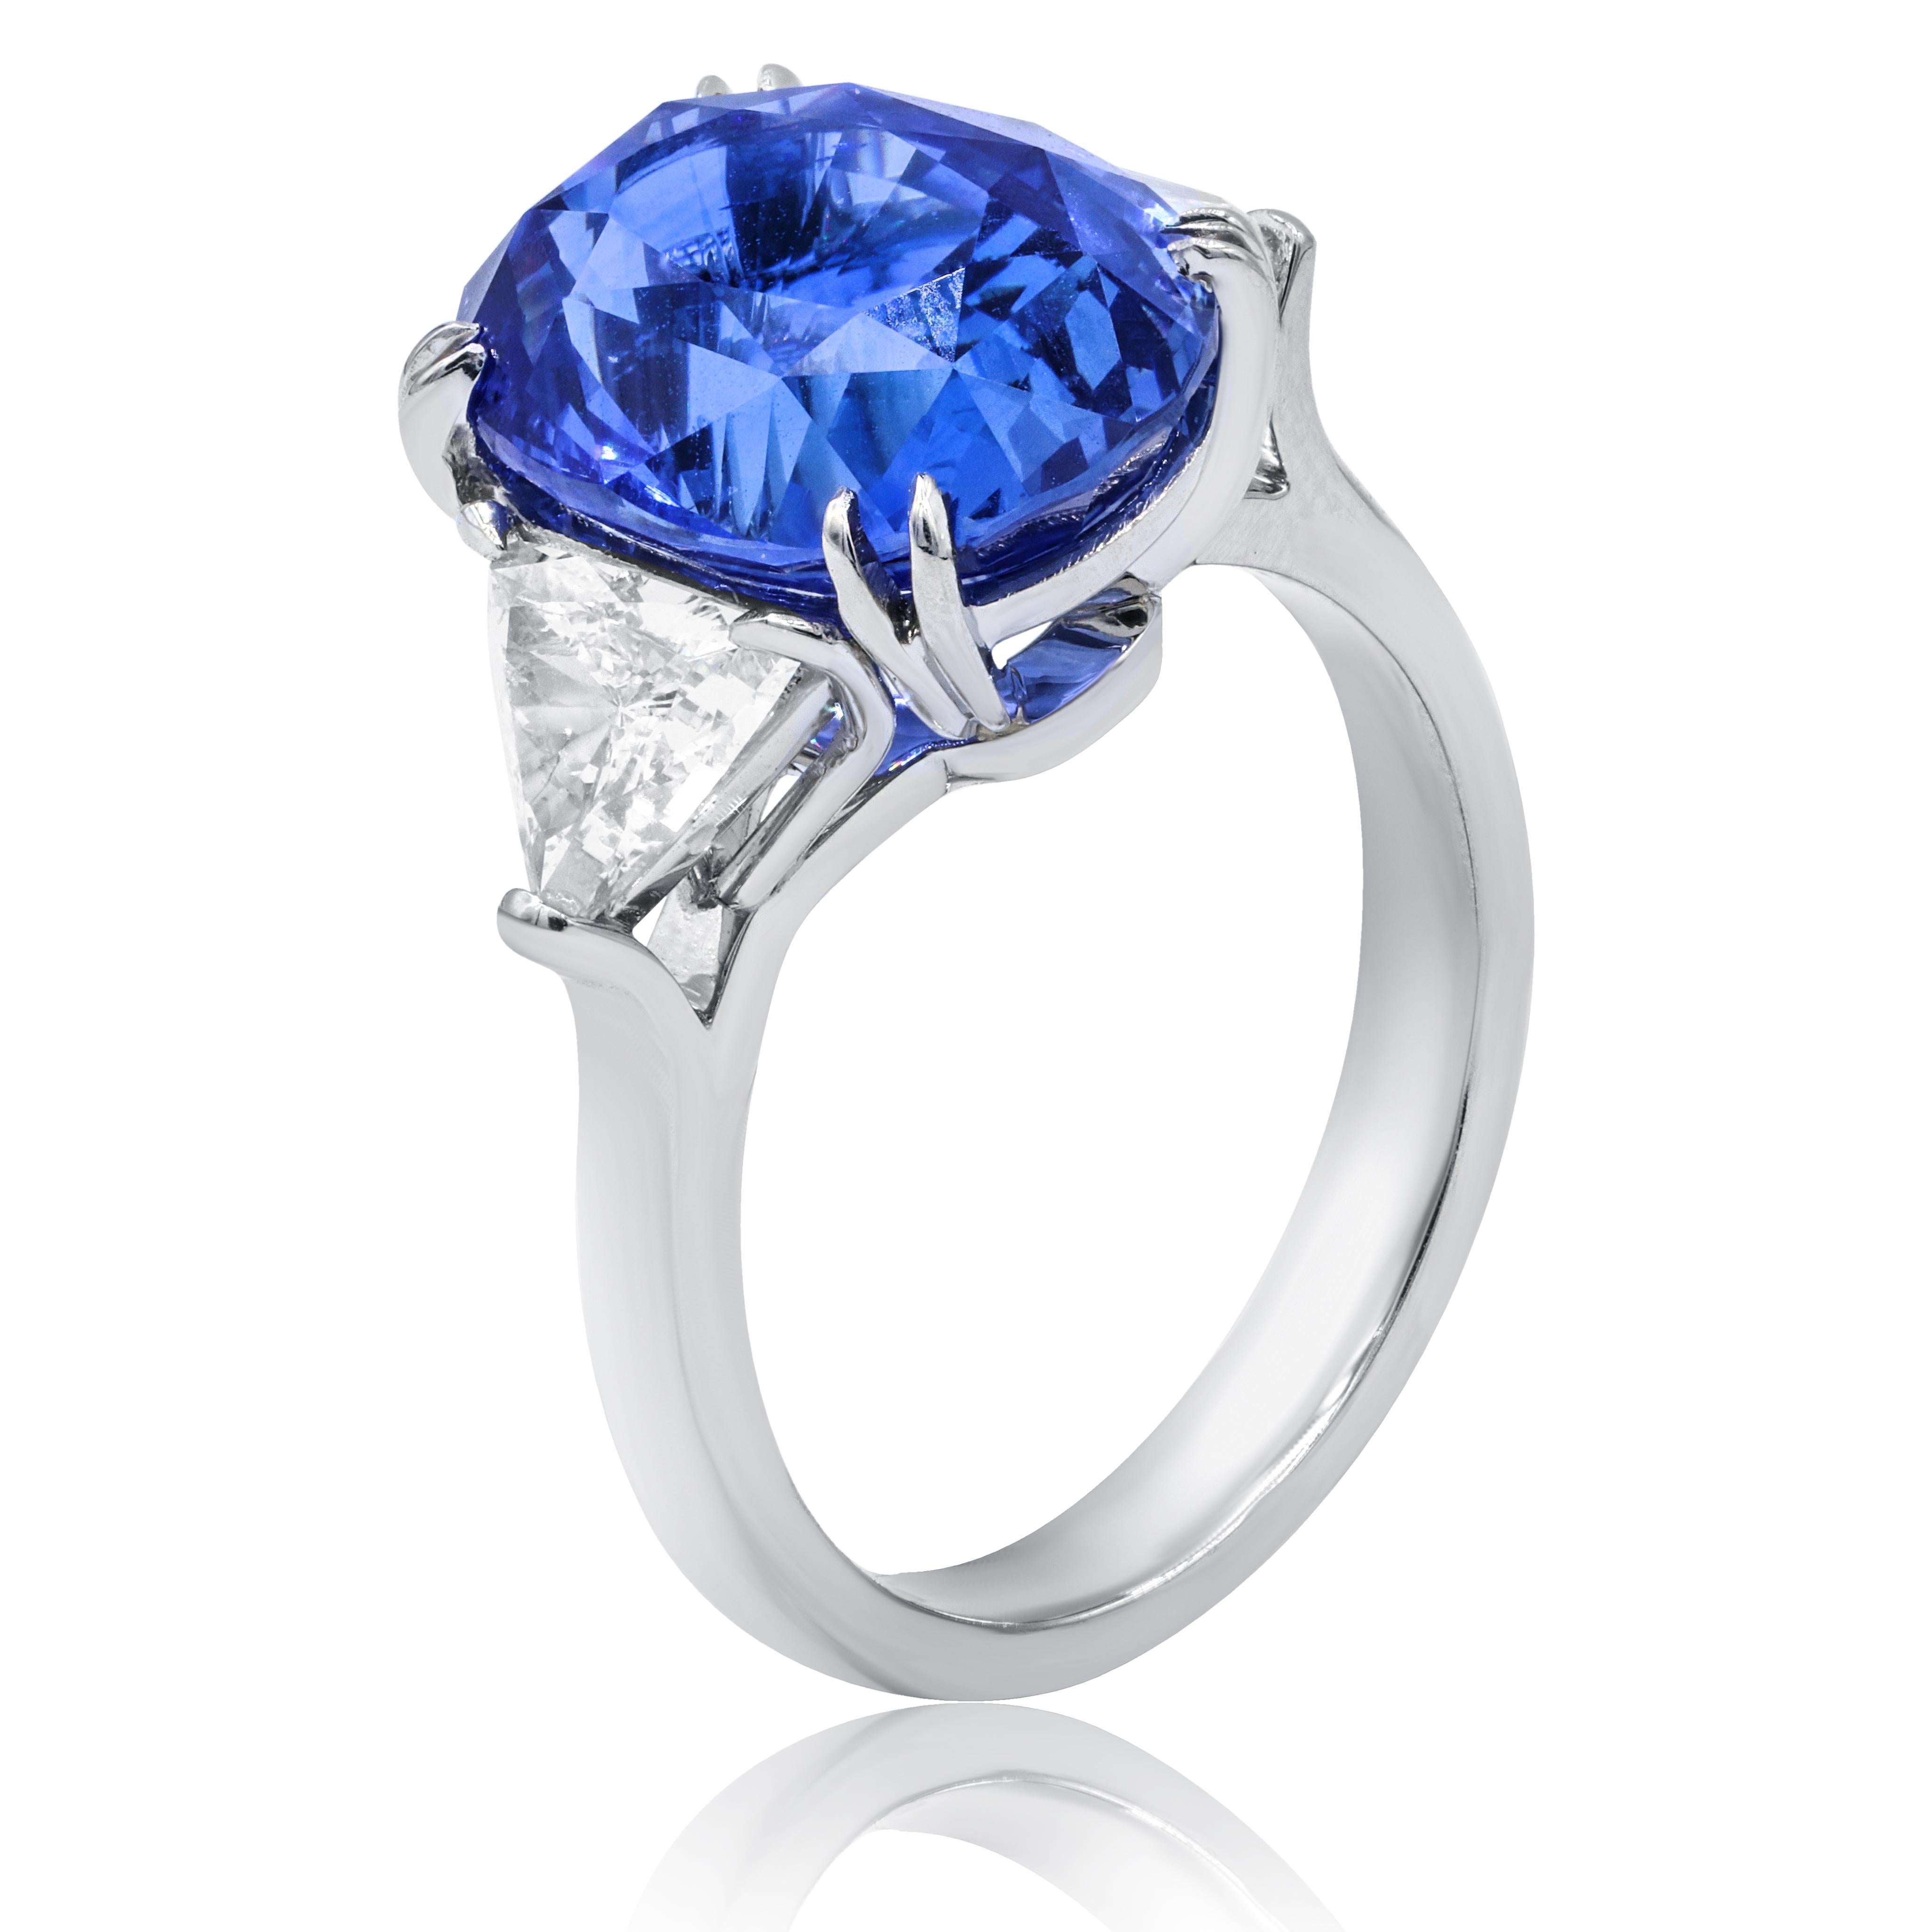 Platinum sapphire and diamond ring an 11.98 ct unheated  oval certified  natural Ceylon blue sapphire  with 2 trillion cut diamonds on side totaling 1.27 cts certified  C. DUNAIGRE
Diana M. is a leading supplier of top-quality fine jewelry for over